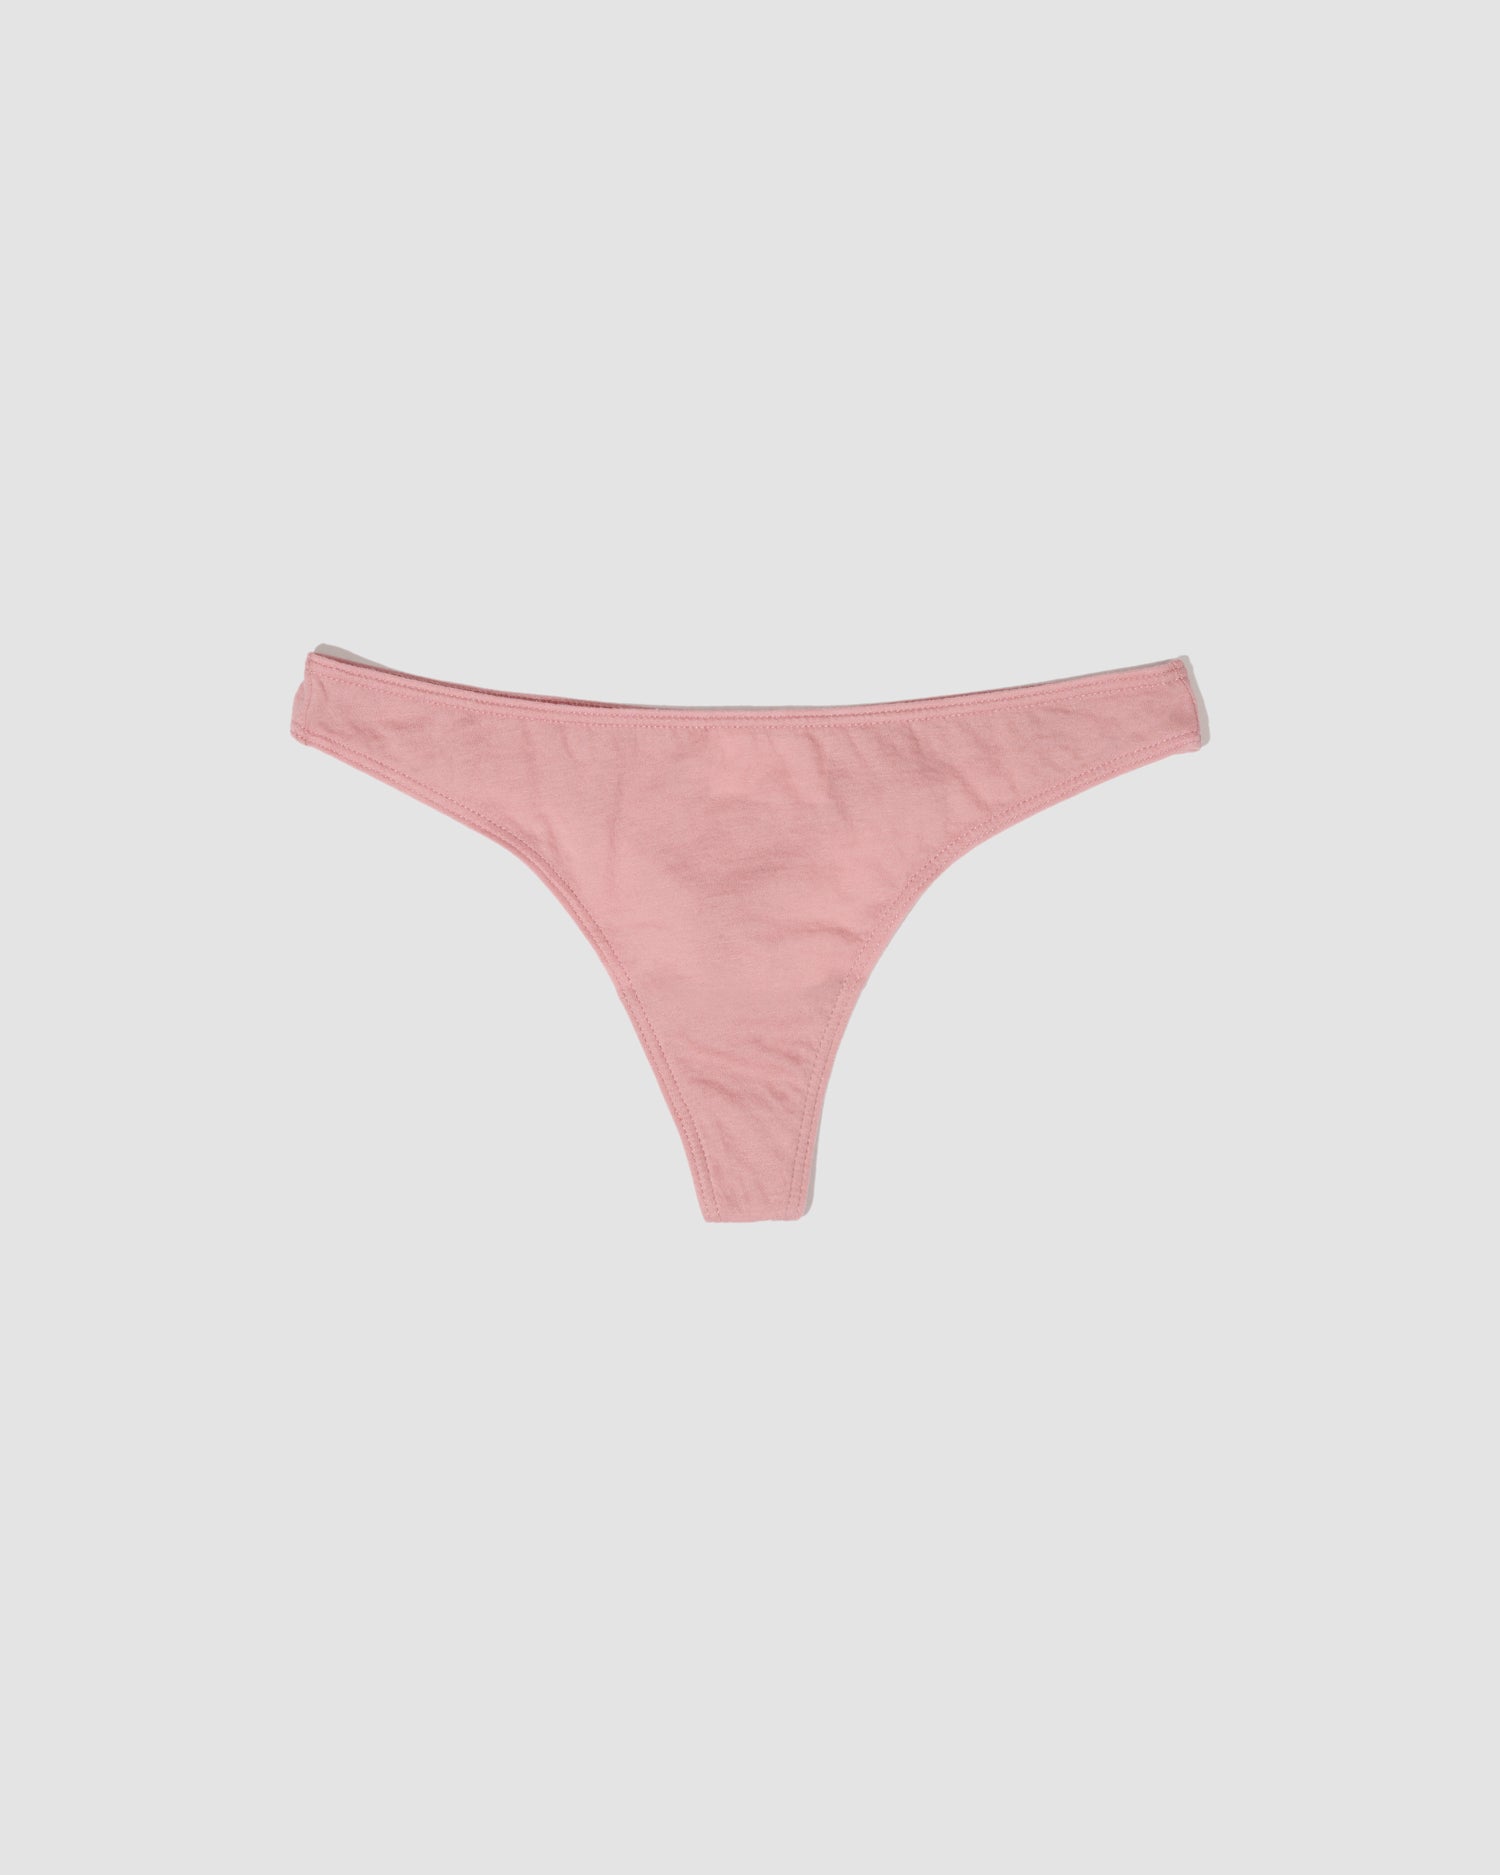 Buy Rainbow Organic Cotton Underwear, Bamboo Lingerie, Elastic Free Panties,  Natural Briefs, Stretchy Comfortable Undies, Mid High Rise Online in India  